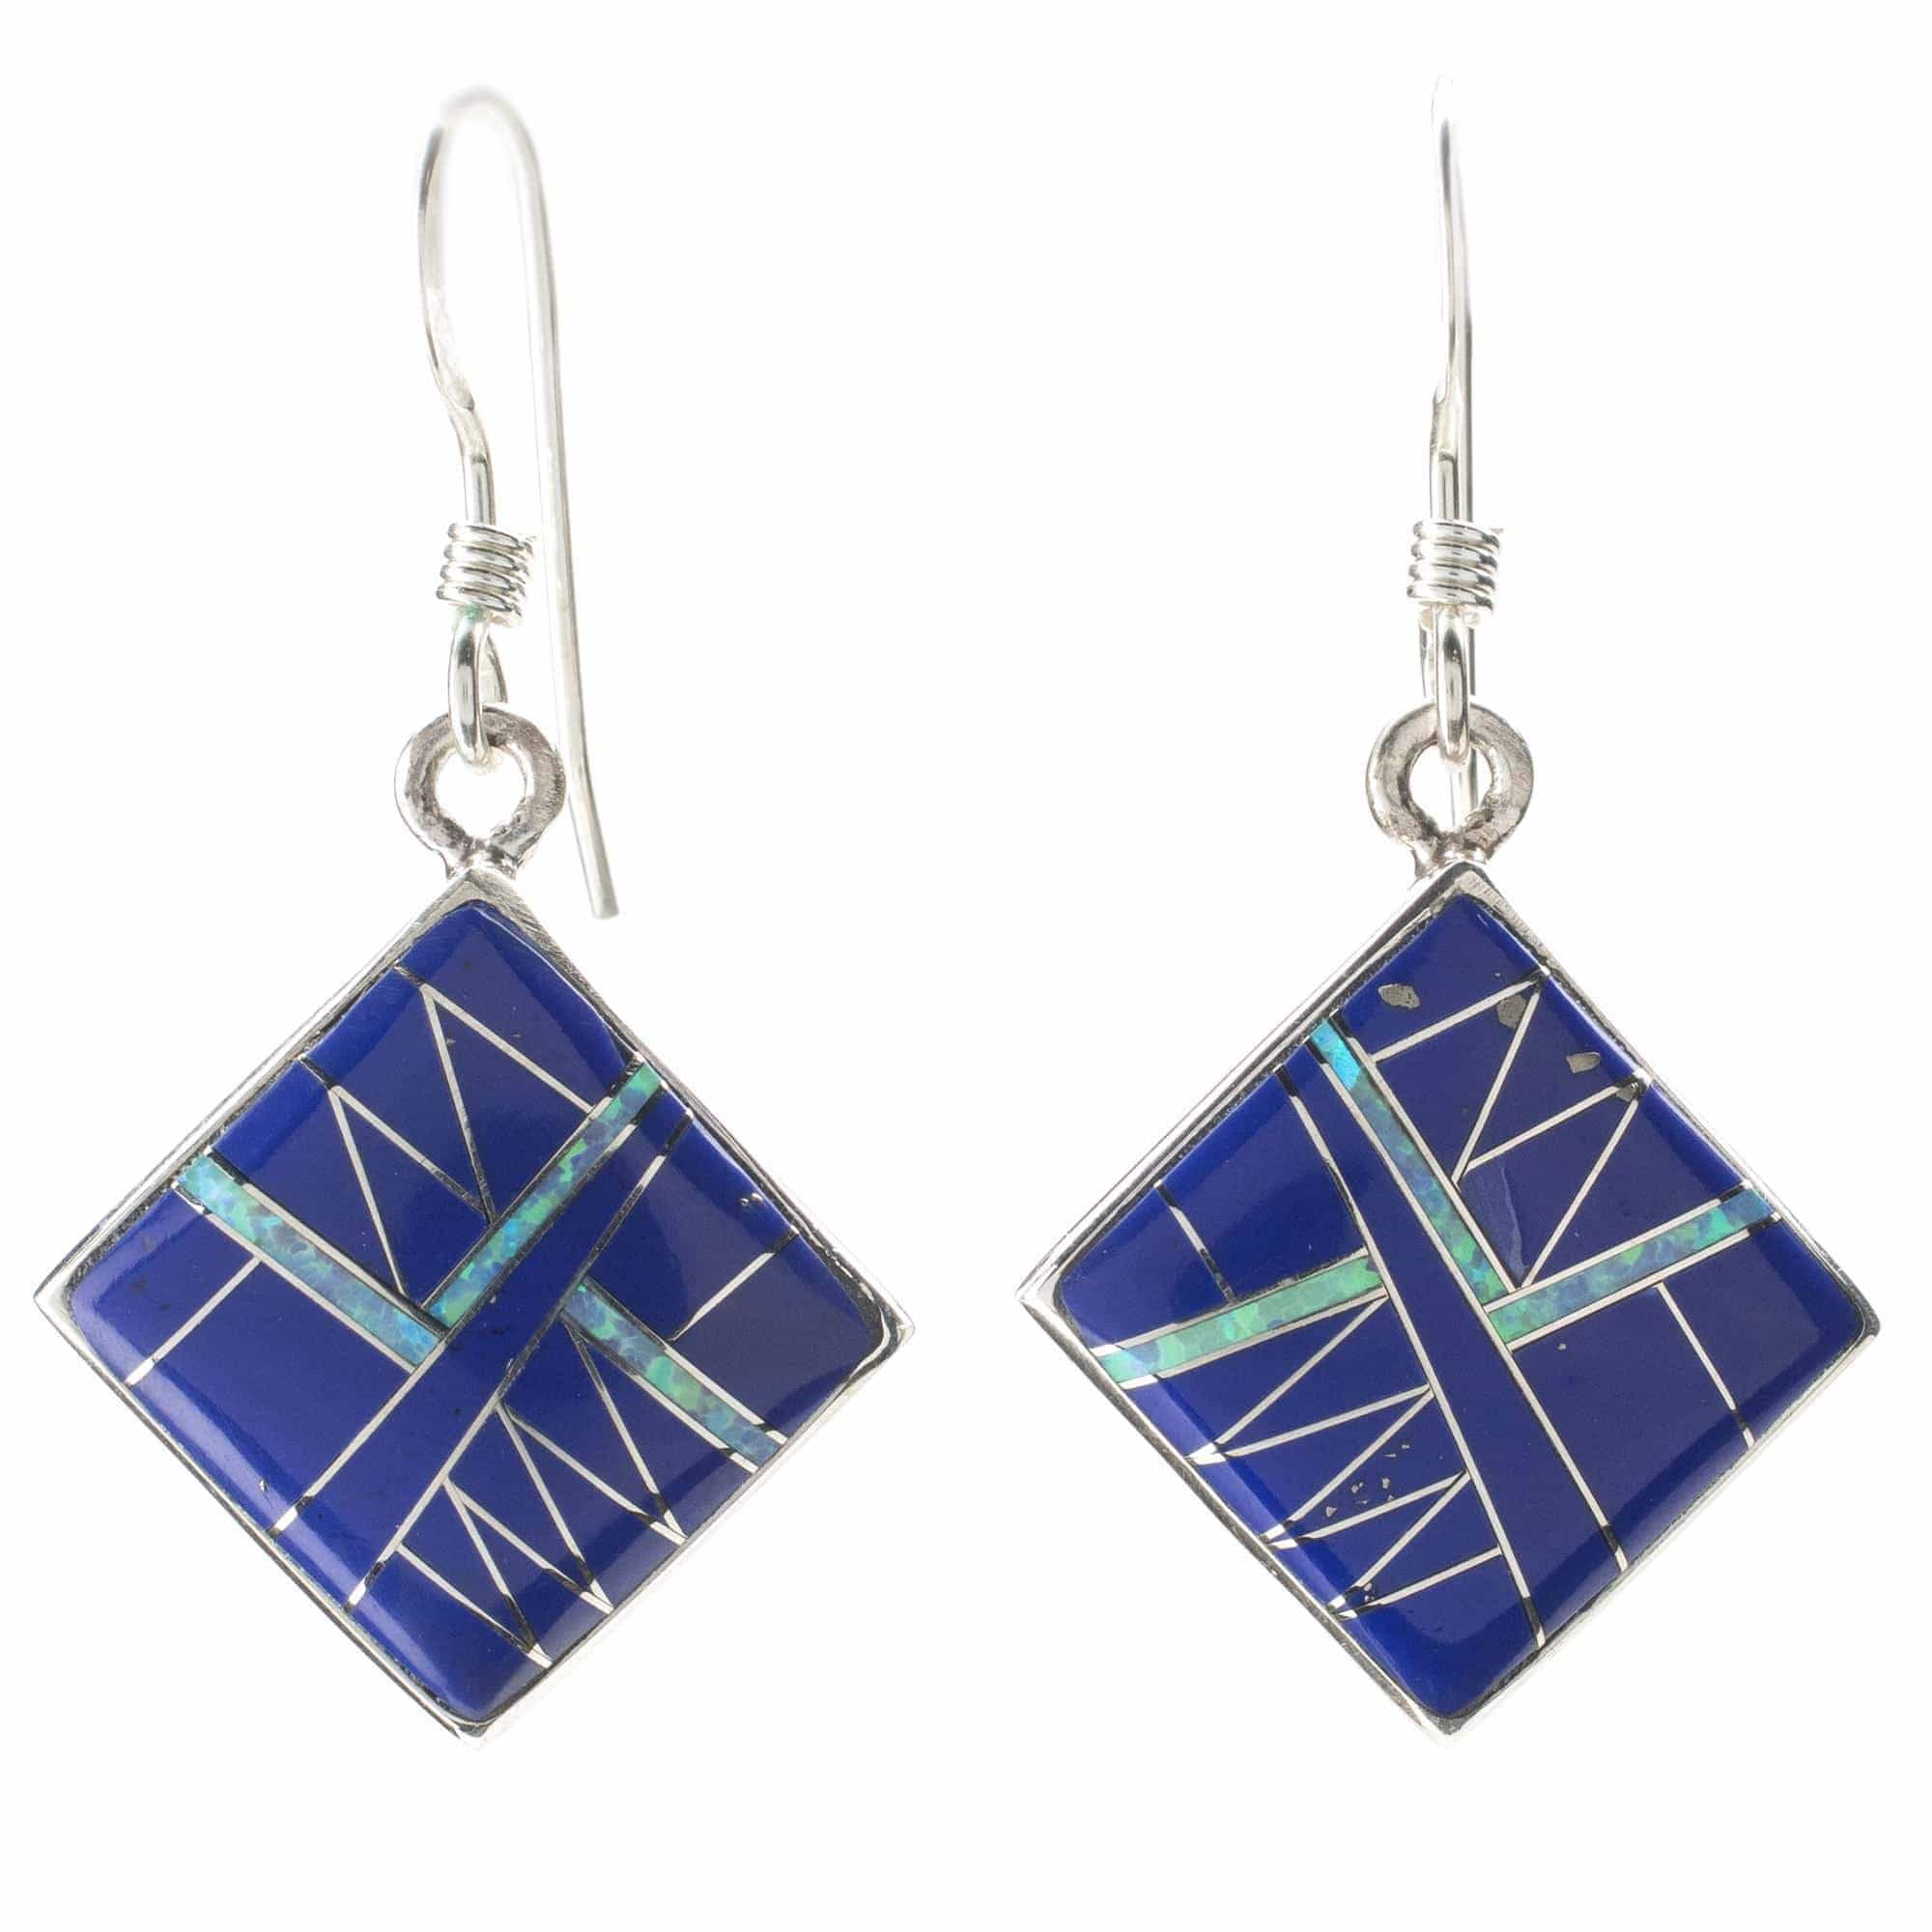 Kalifano Southwest Silver Jewelry Lapis Square 925 Sterling Silver Earring with French Hook USA Handmade with Aqua Opal Accent NME.2016.LP